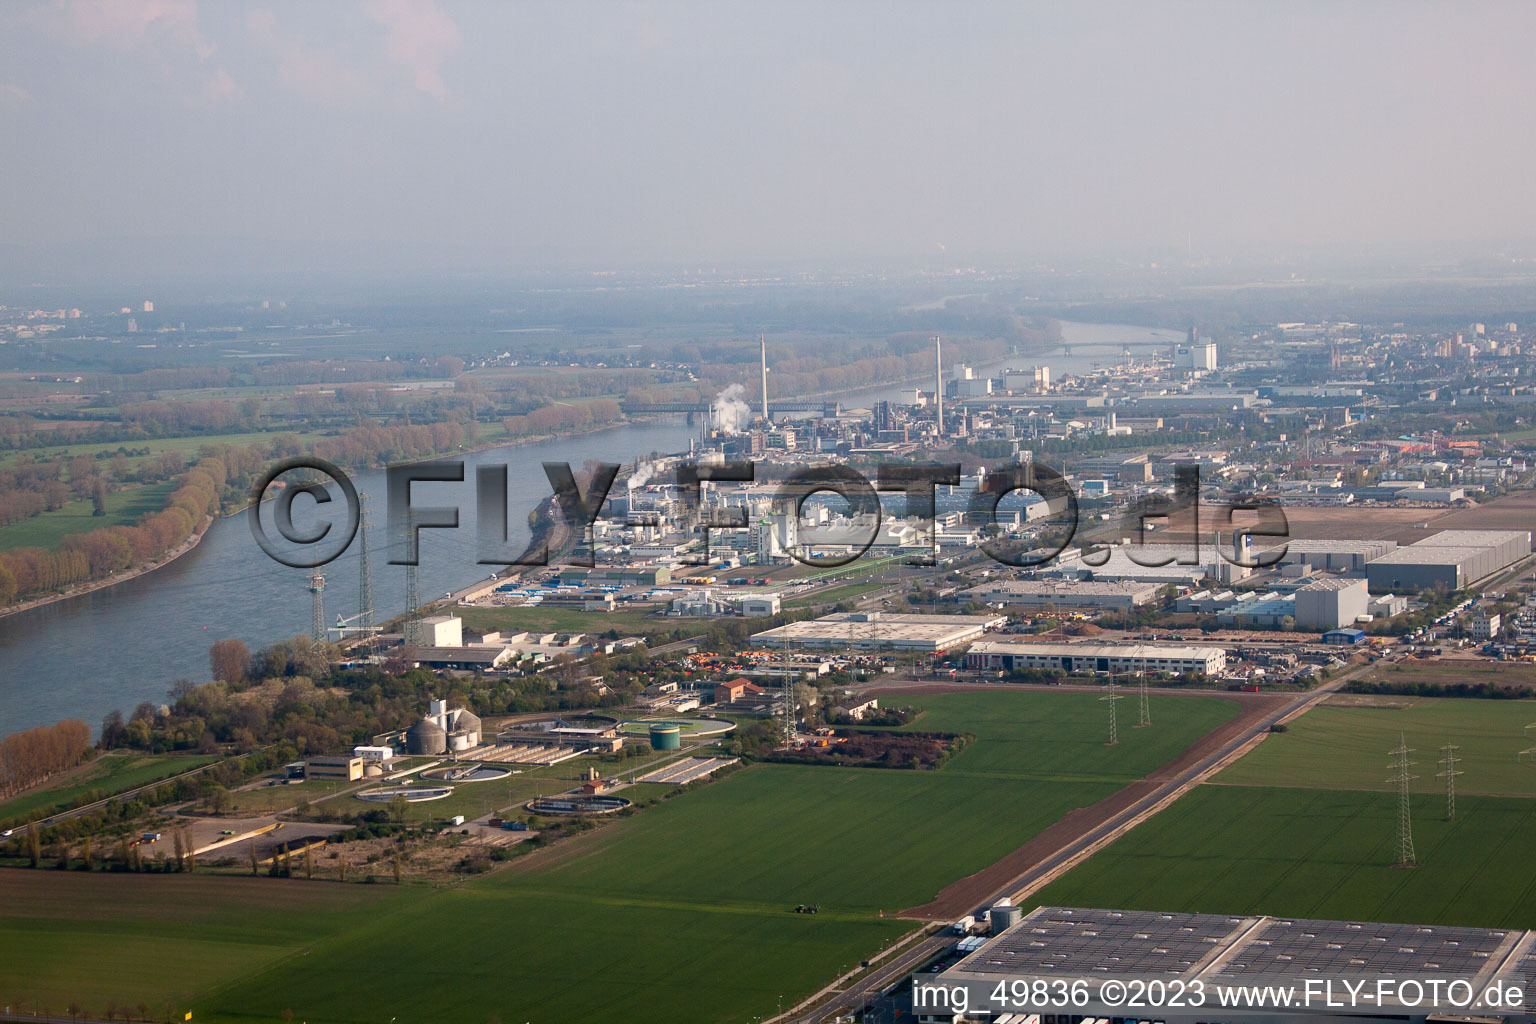 North industrial area on the Rhine in Worms in the state Rhineland-Palatinate, Germany seen from above